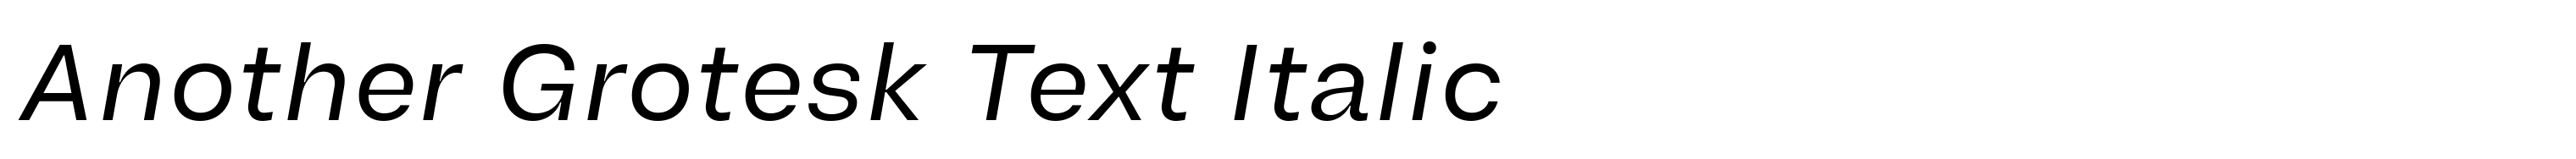 Another Grotesk Text Italic